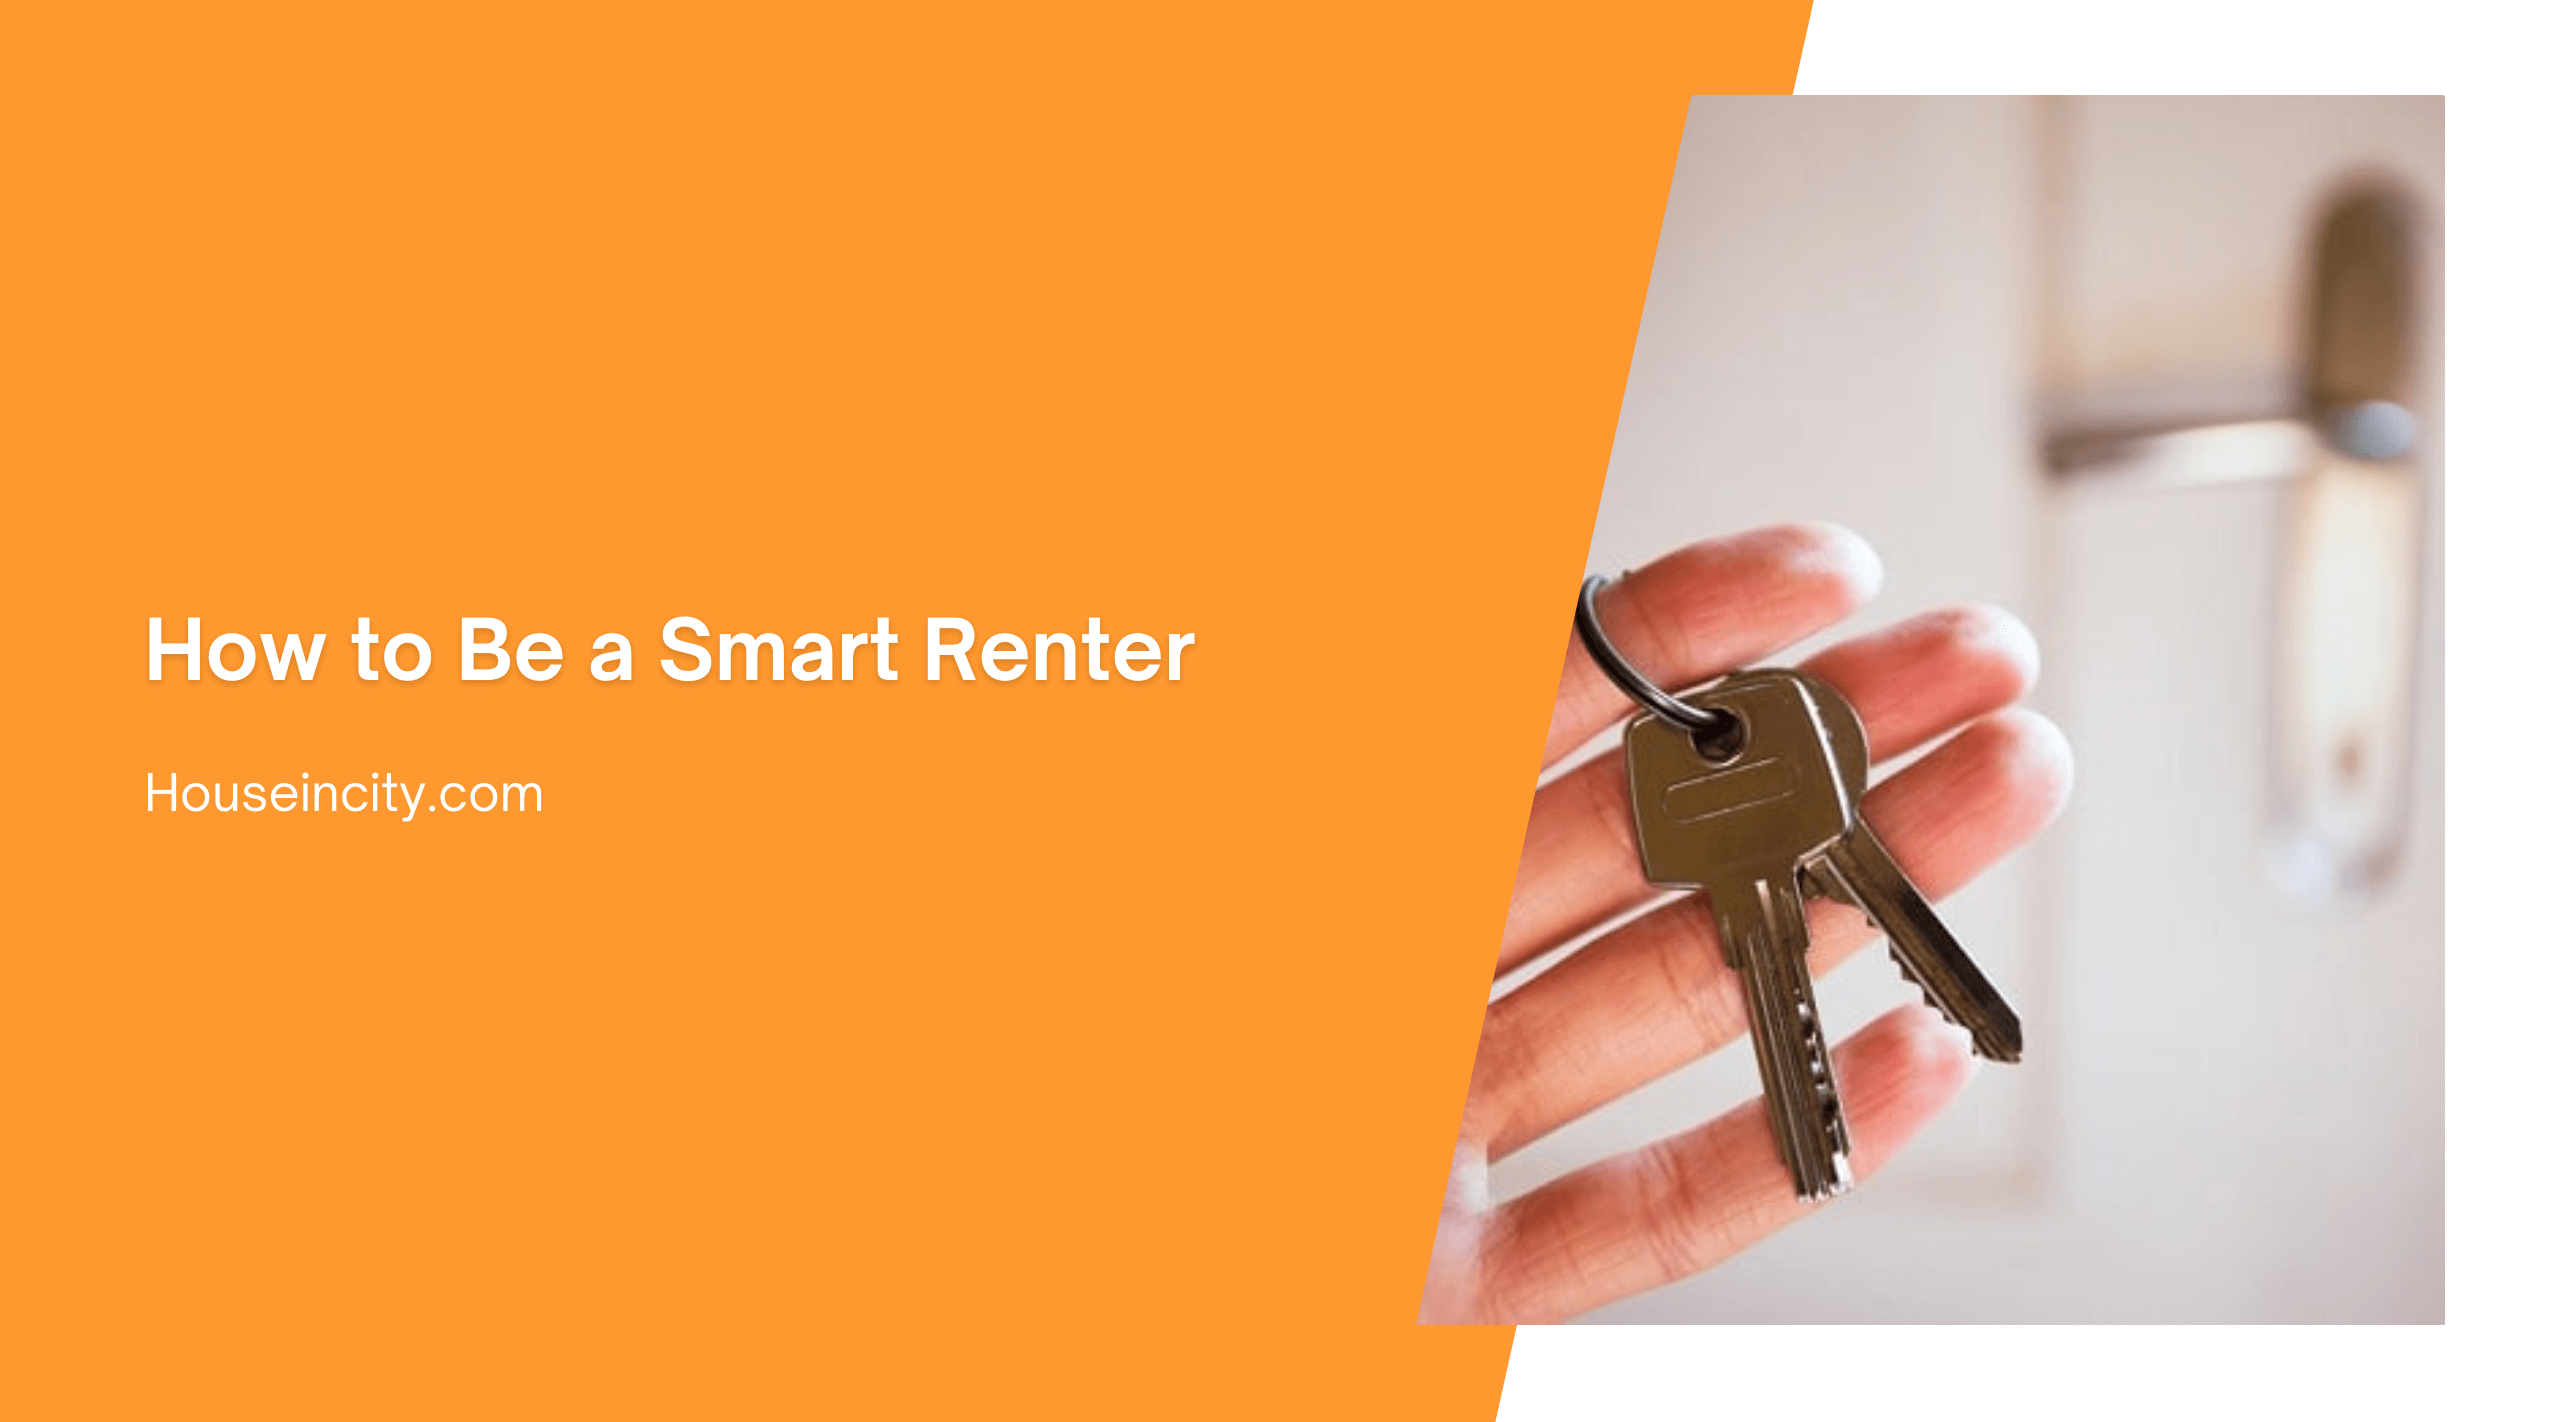 How to Be a Smart Renter